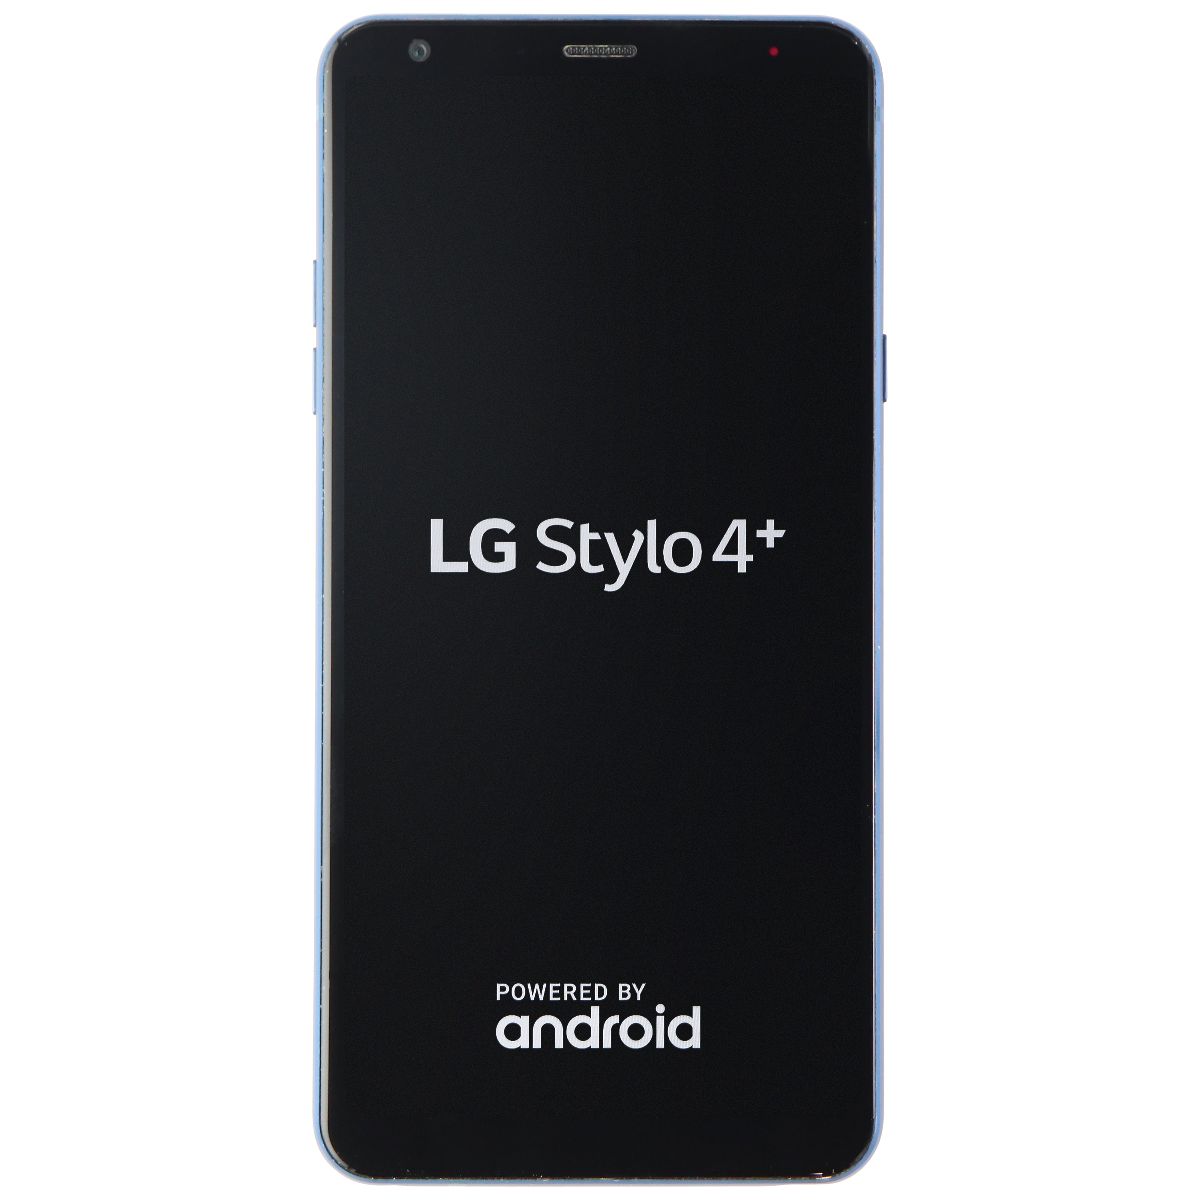 LG Stylo 4 Plus (6.2-inch) Smartphone (LG-Q710PL) Boost Mobile Only - 32GB/Blue Cell Phones & Smartphones LG    - Simple Cell Bulk Wholesale Pricing - USA Seller